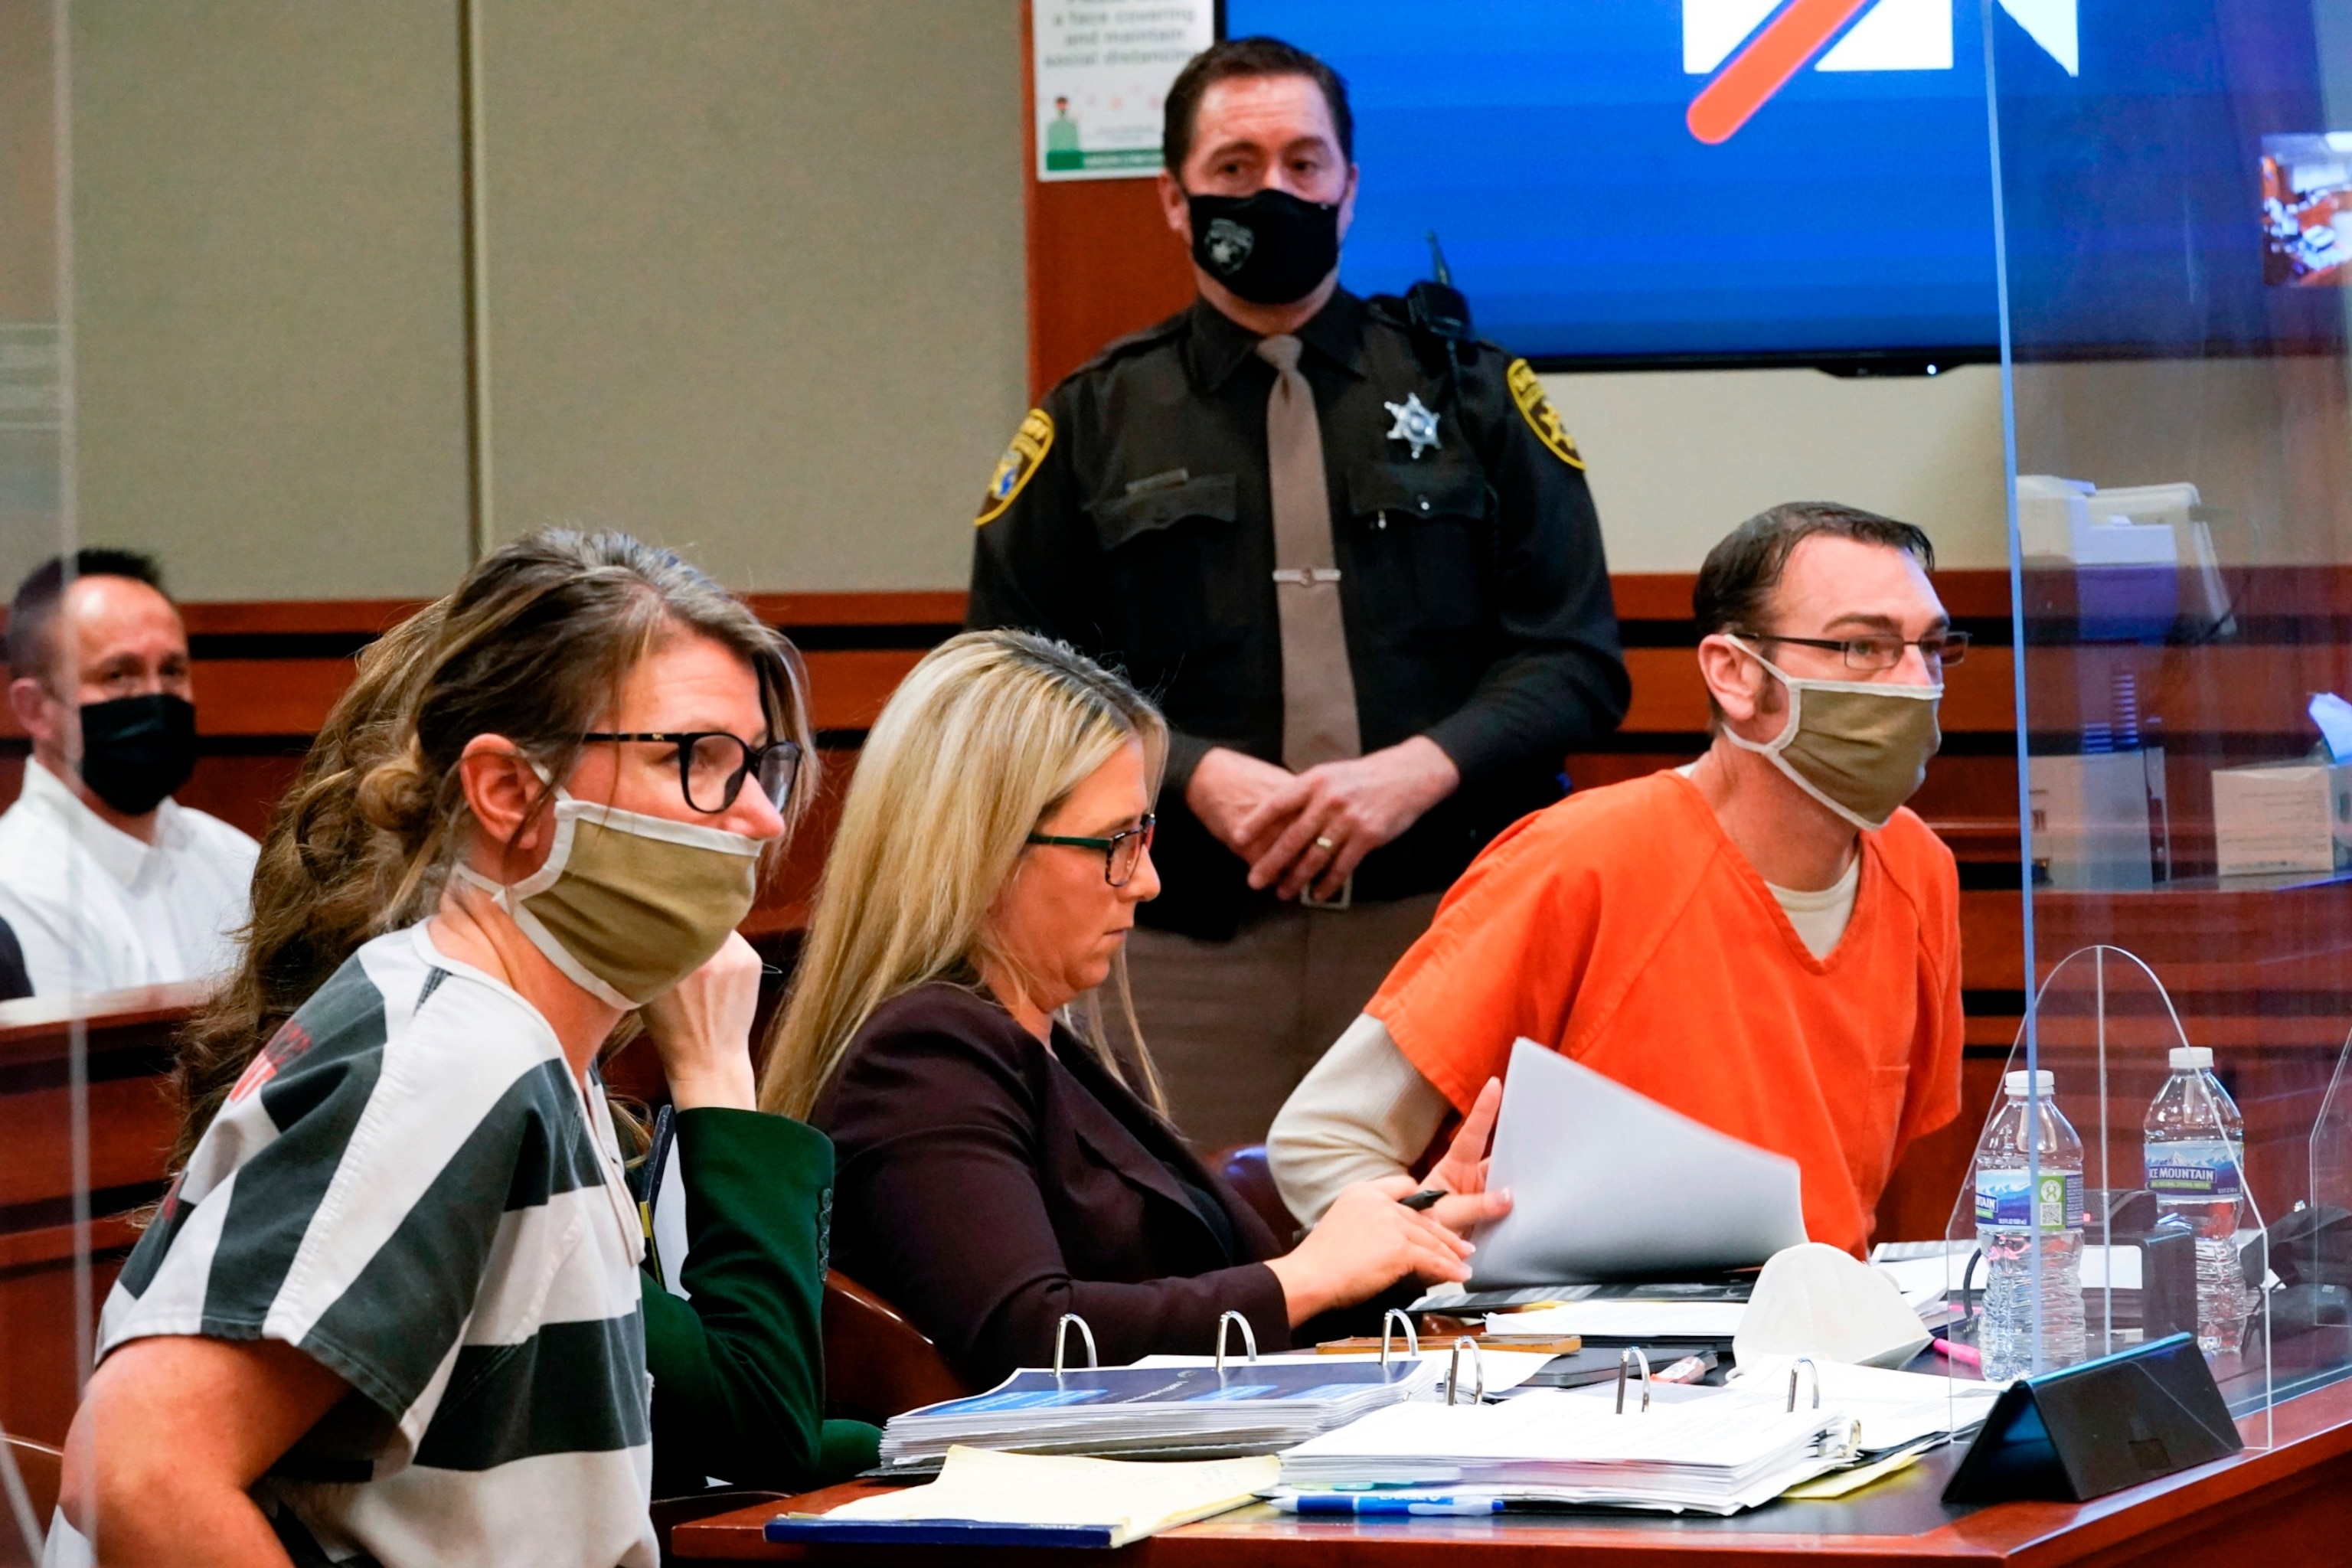 PHOTO: Jennifer Crumbley, left, and James Crumbley, right, the parents of Ethan Crumbley, appear in court for a preliminary examination on involuntary manslaughter charges in Rochester Hills, Mich., Feb. 8, 2022.